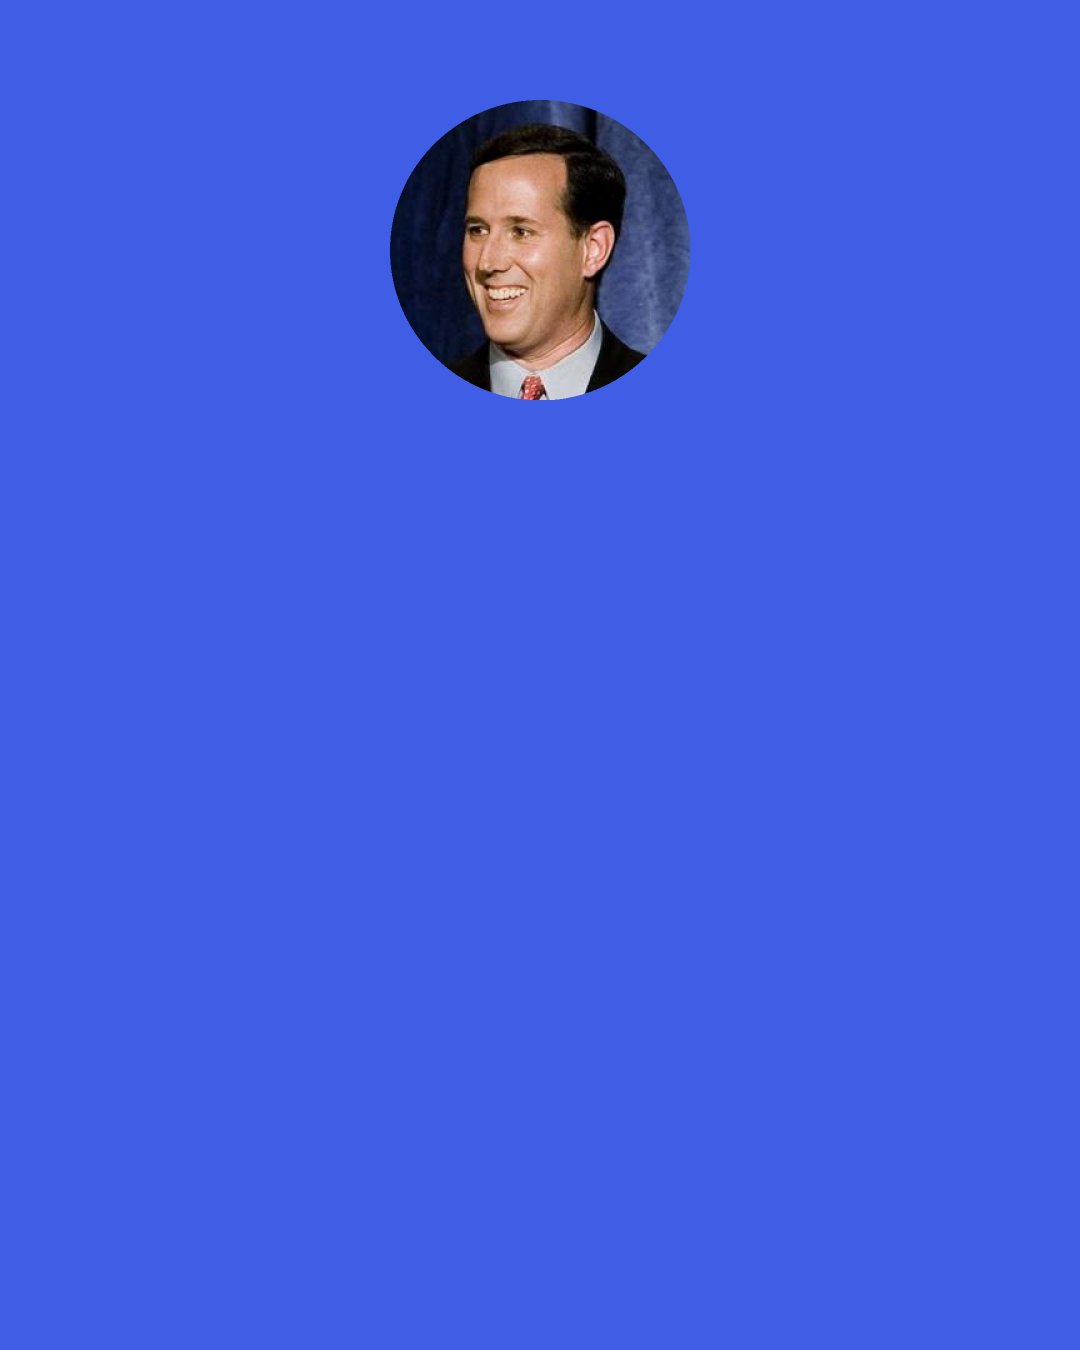 Rick Santorum: They talk about income inequality. I’m for income inequality.